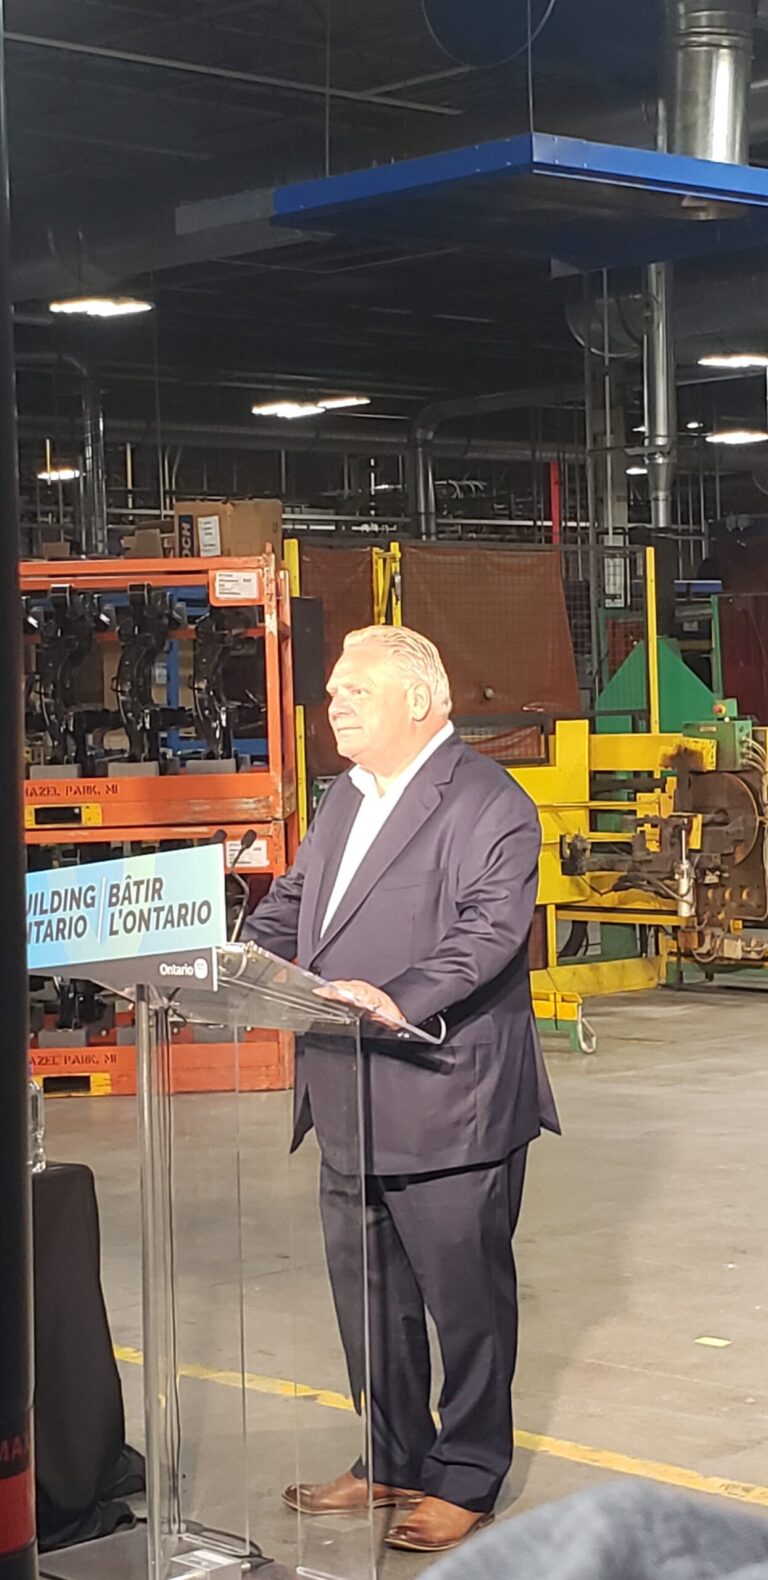 Premier Ford says plan in place to help hospitals deal with human resource shortages